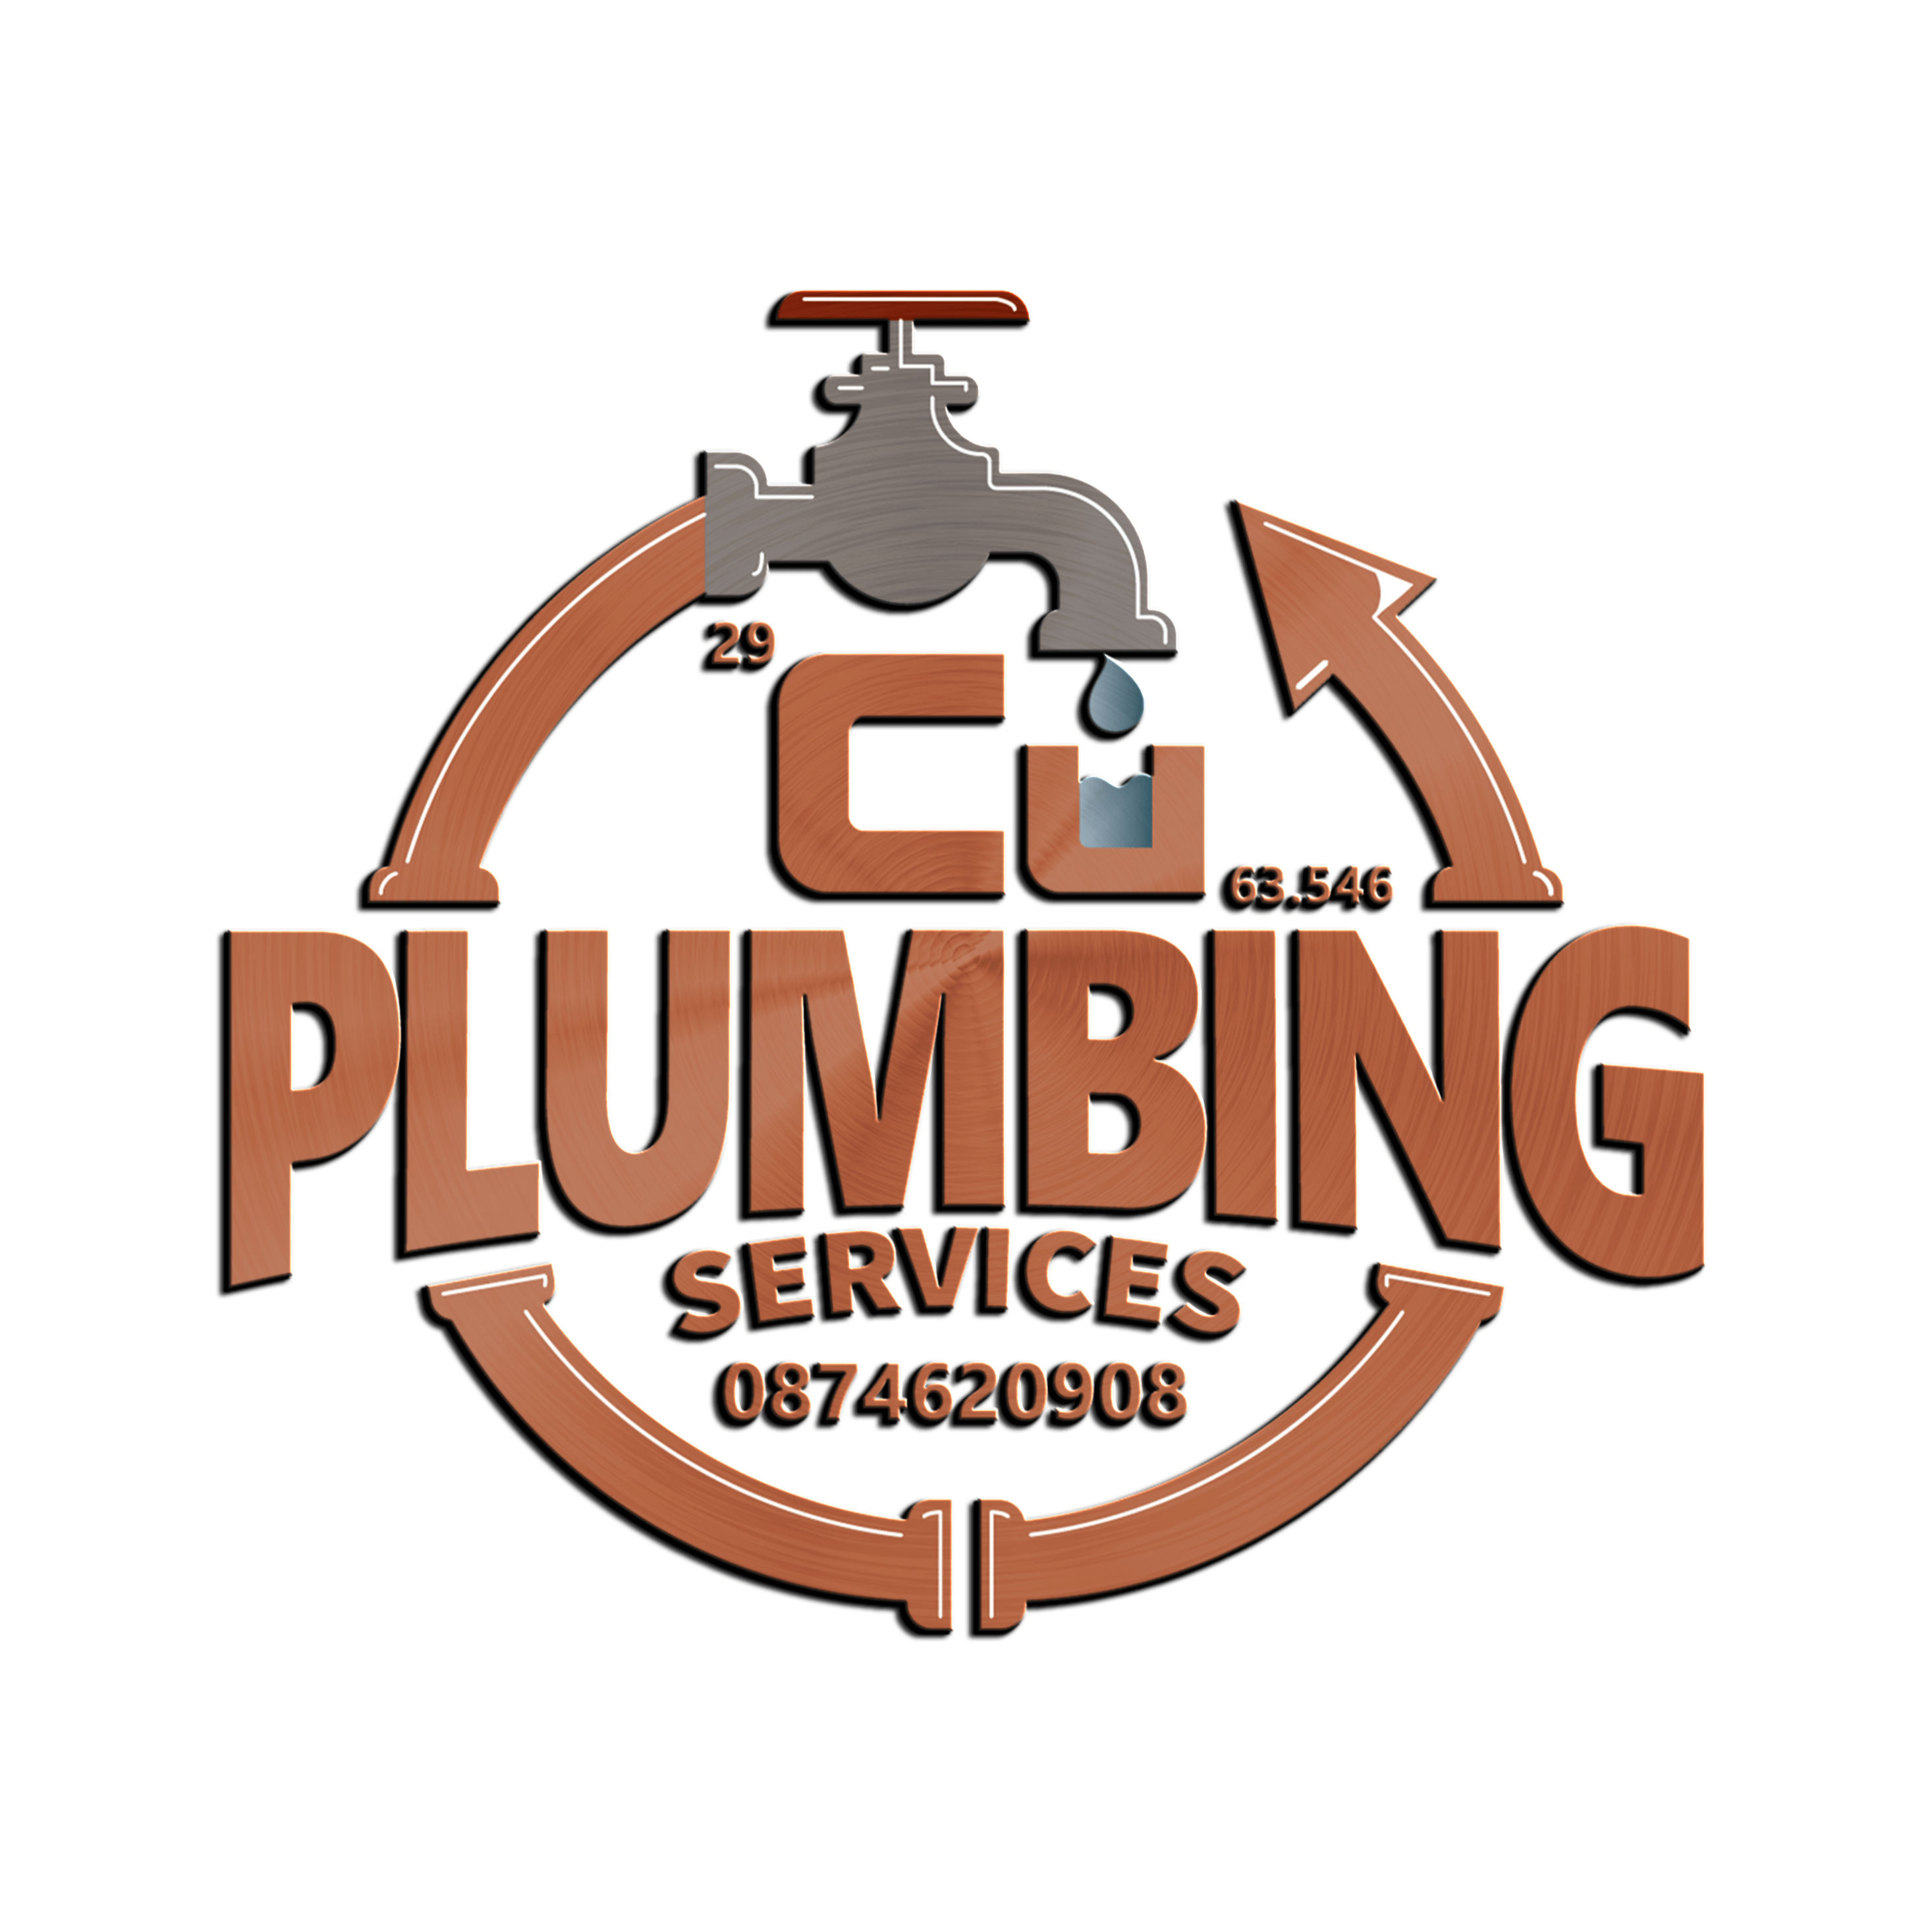 Professional Plumbing Services in Dundrum